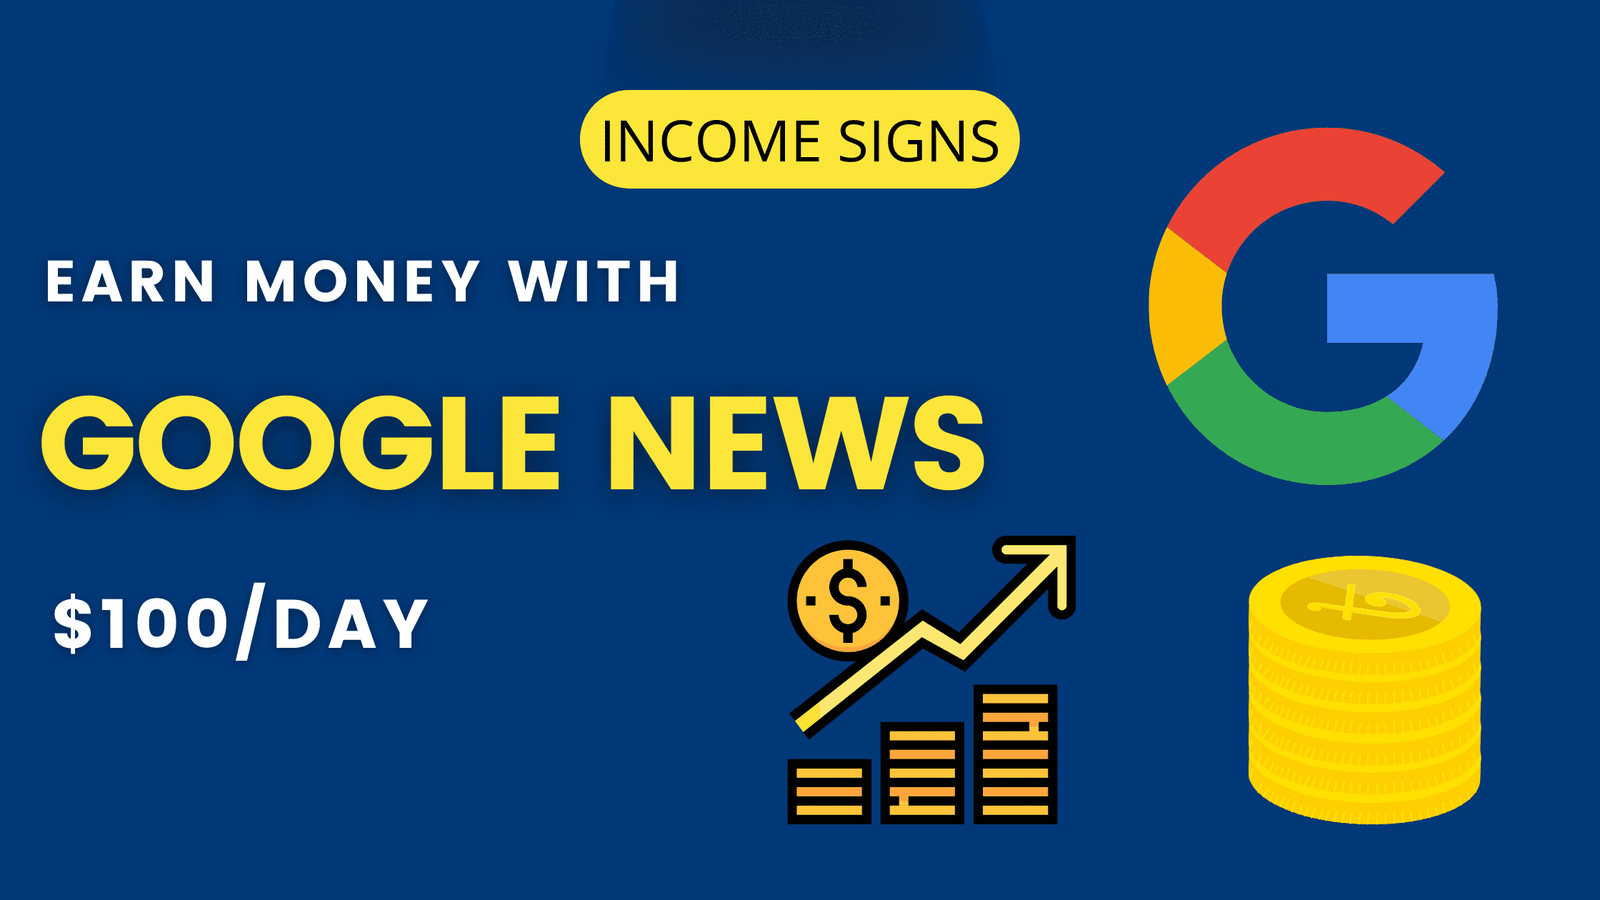 How can I Earn Money with Google News?